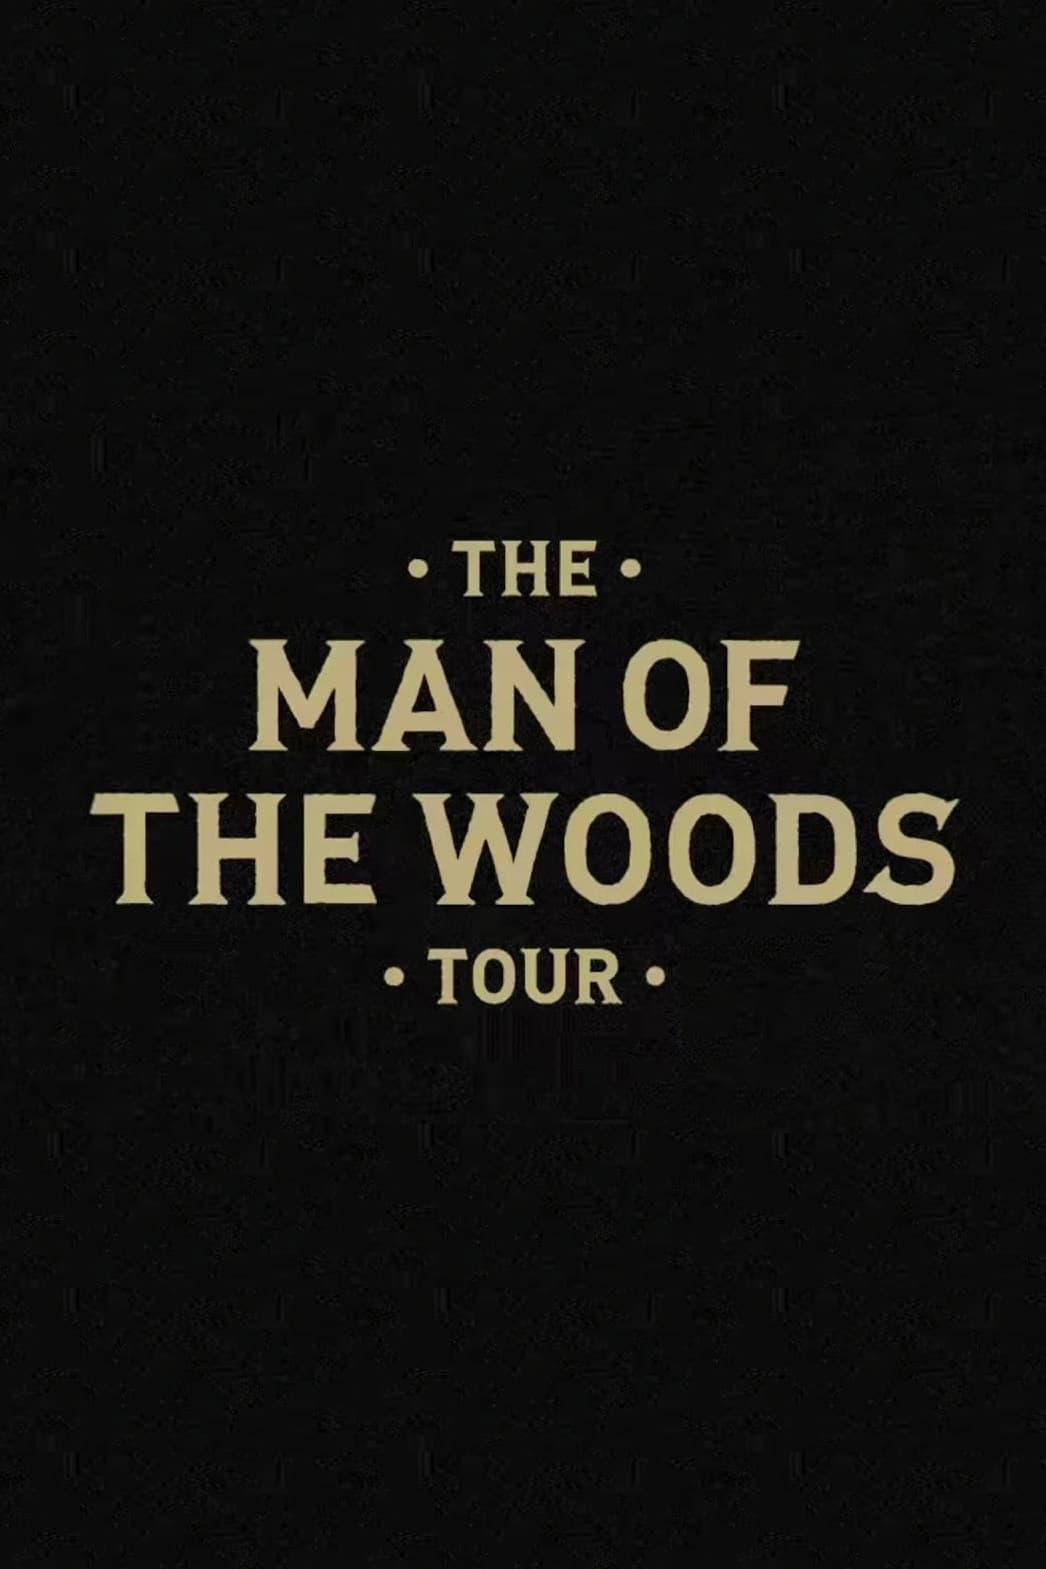 The Man of the Woods Tour poster